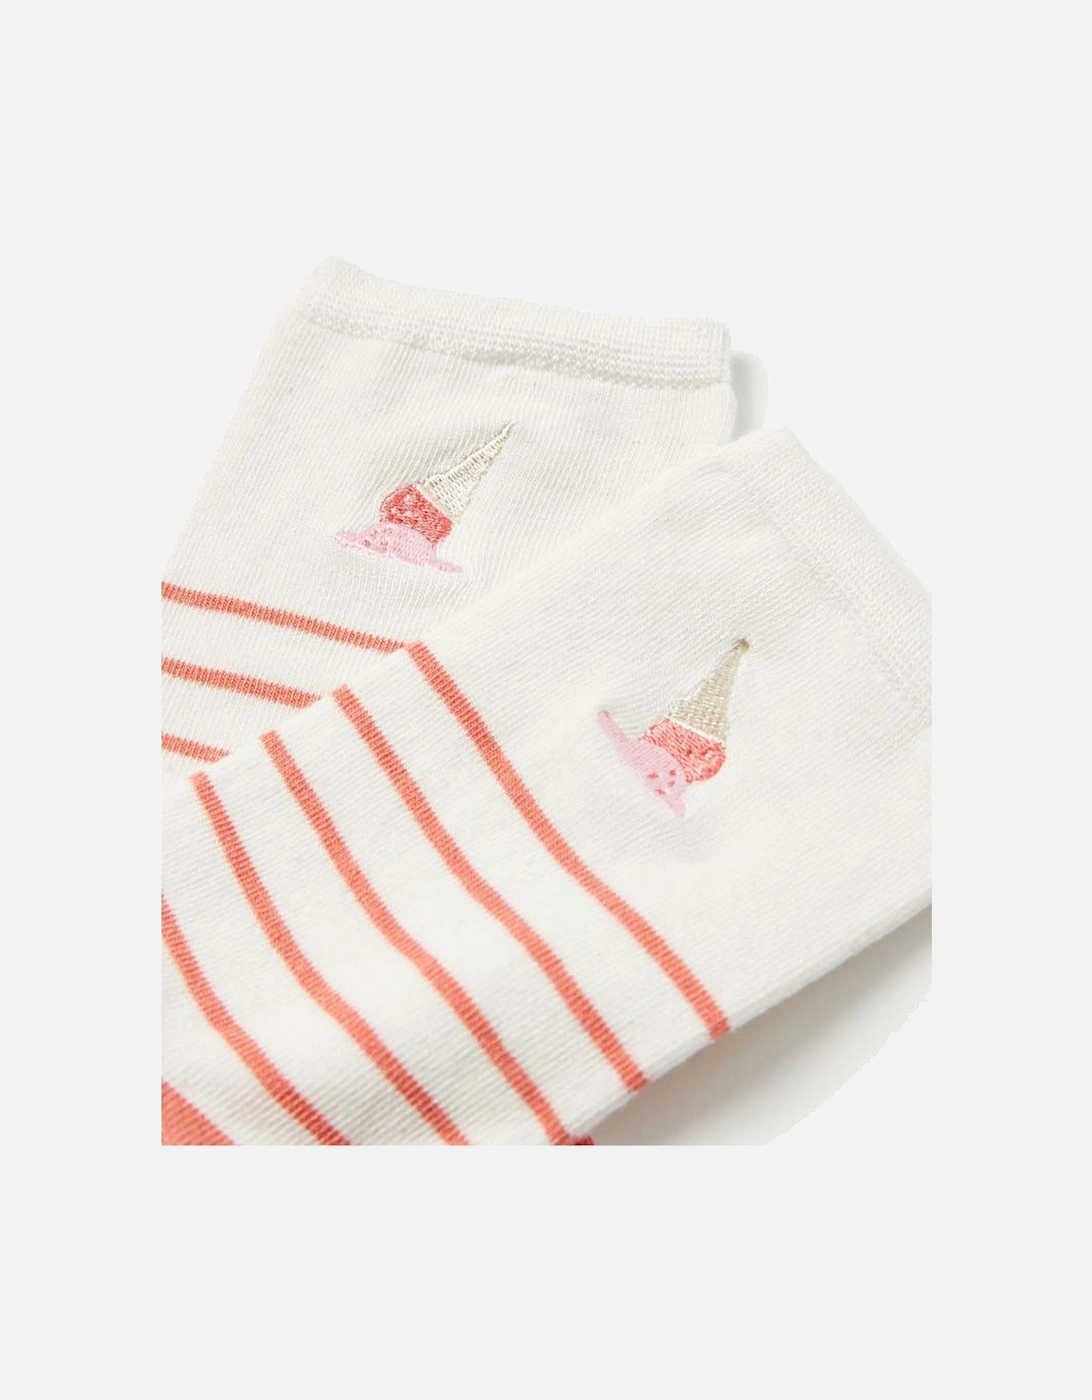 Womens Embroidered Socks